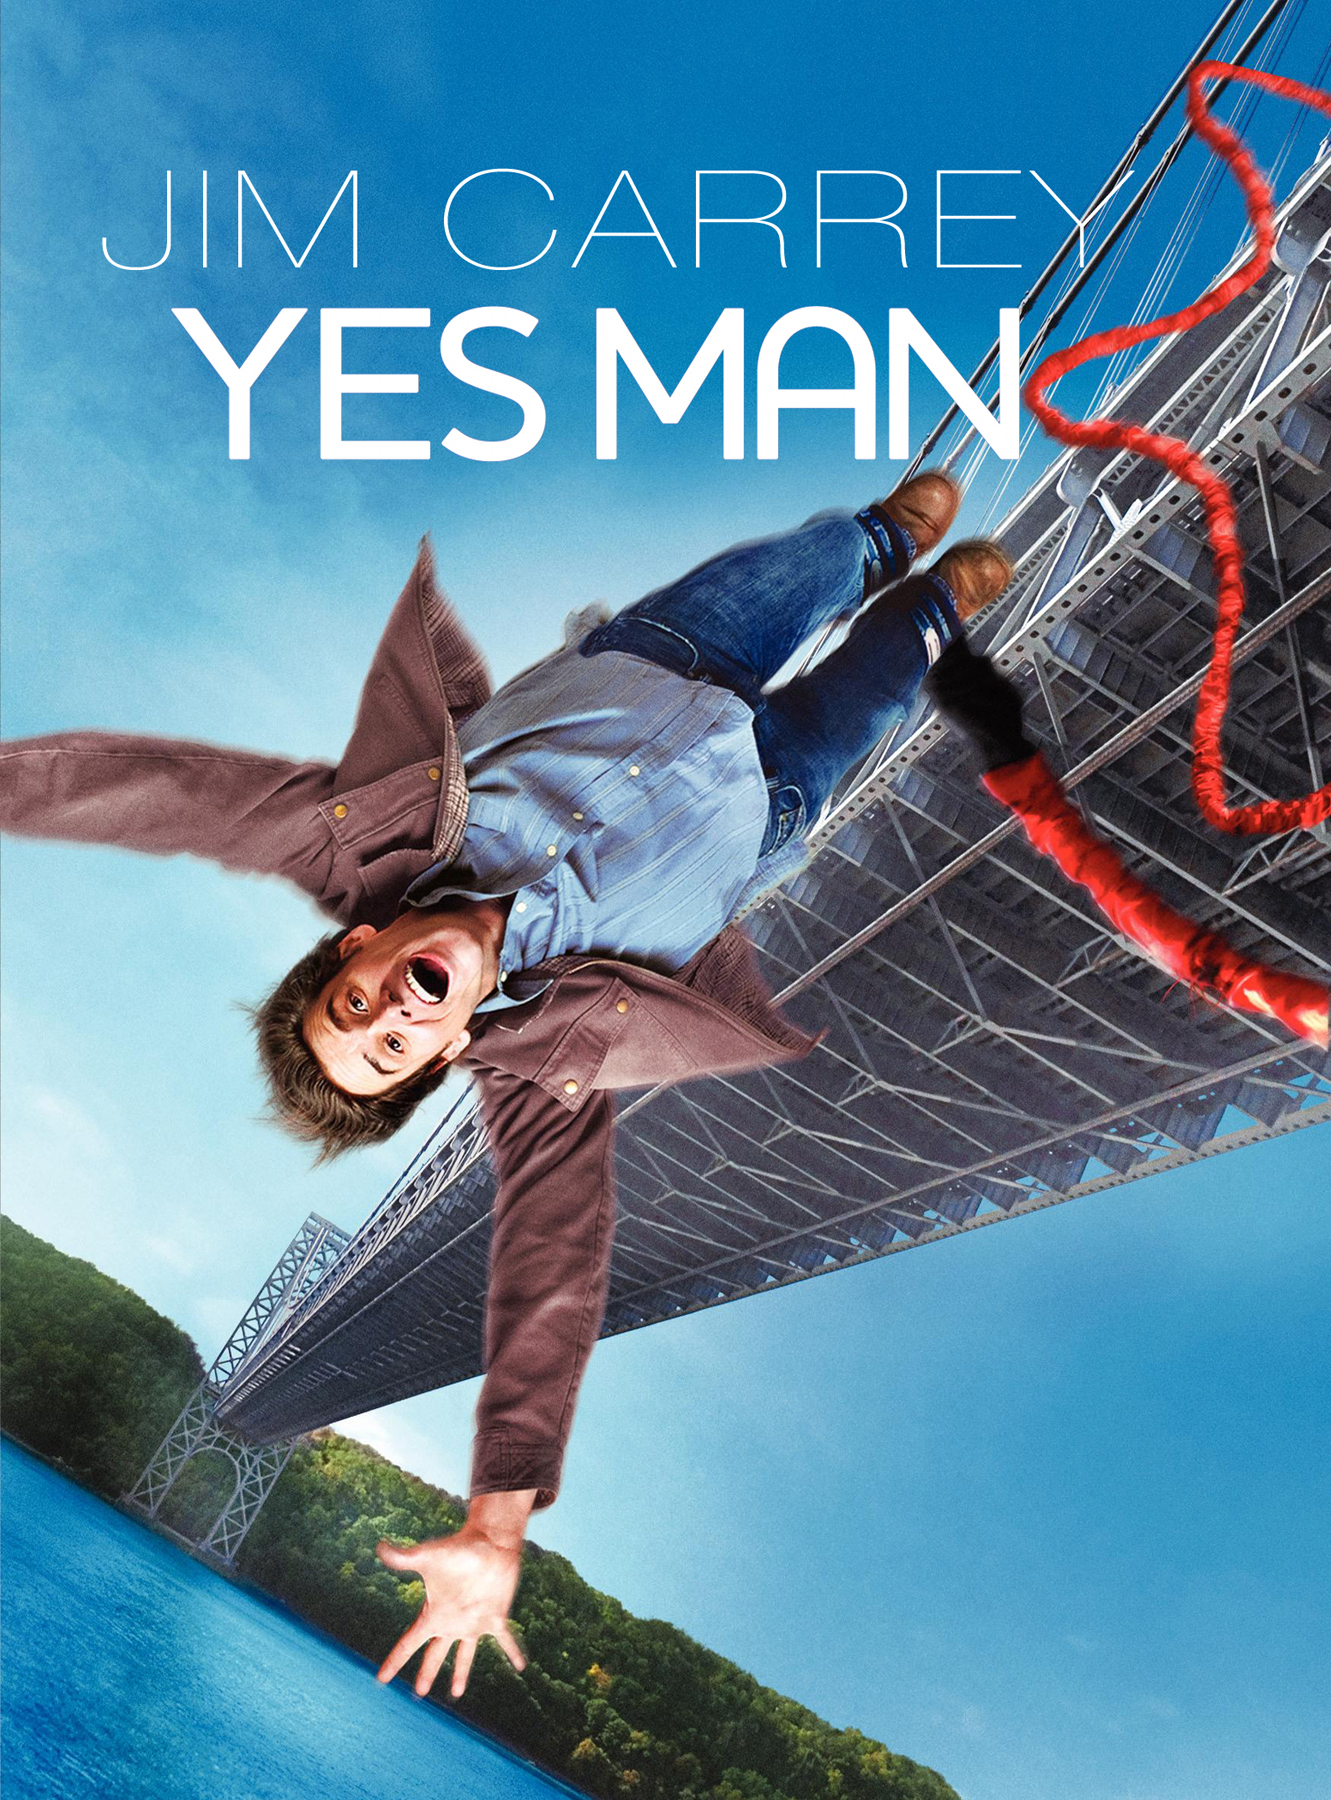 movie review yes man